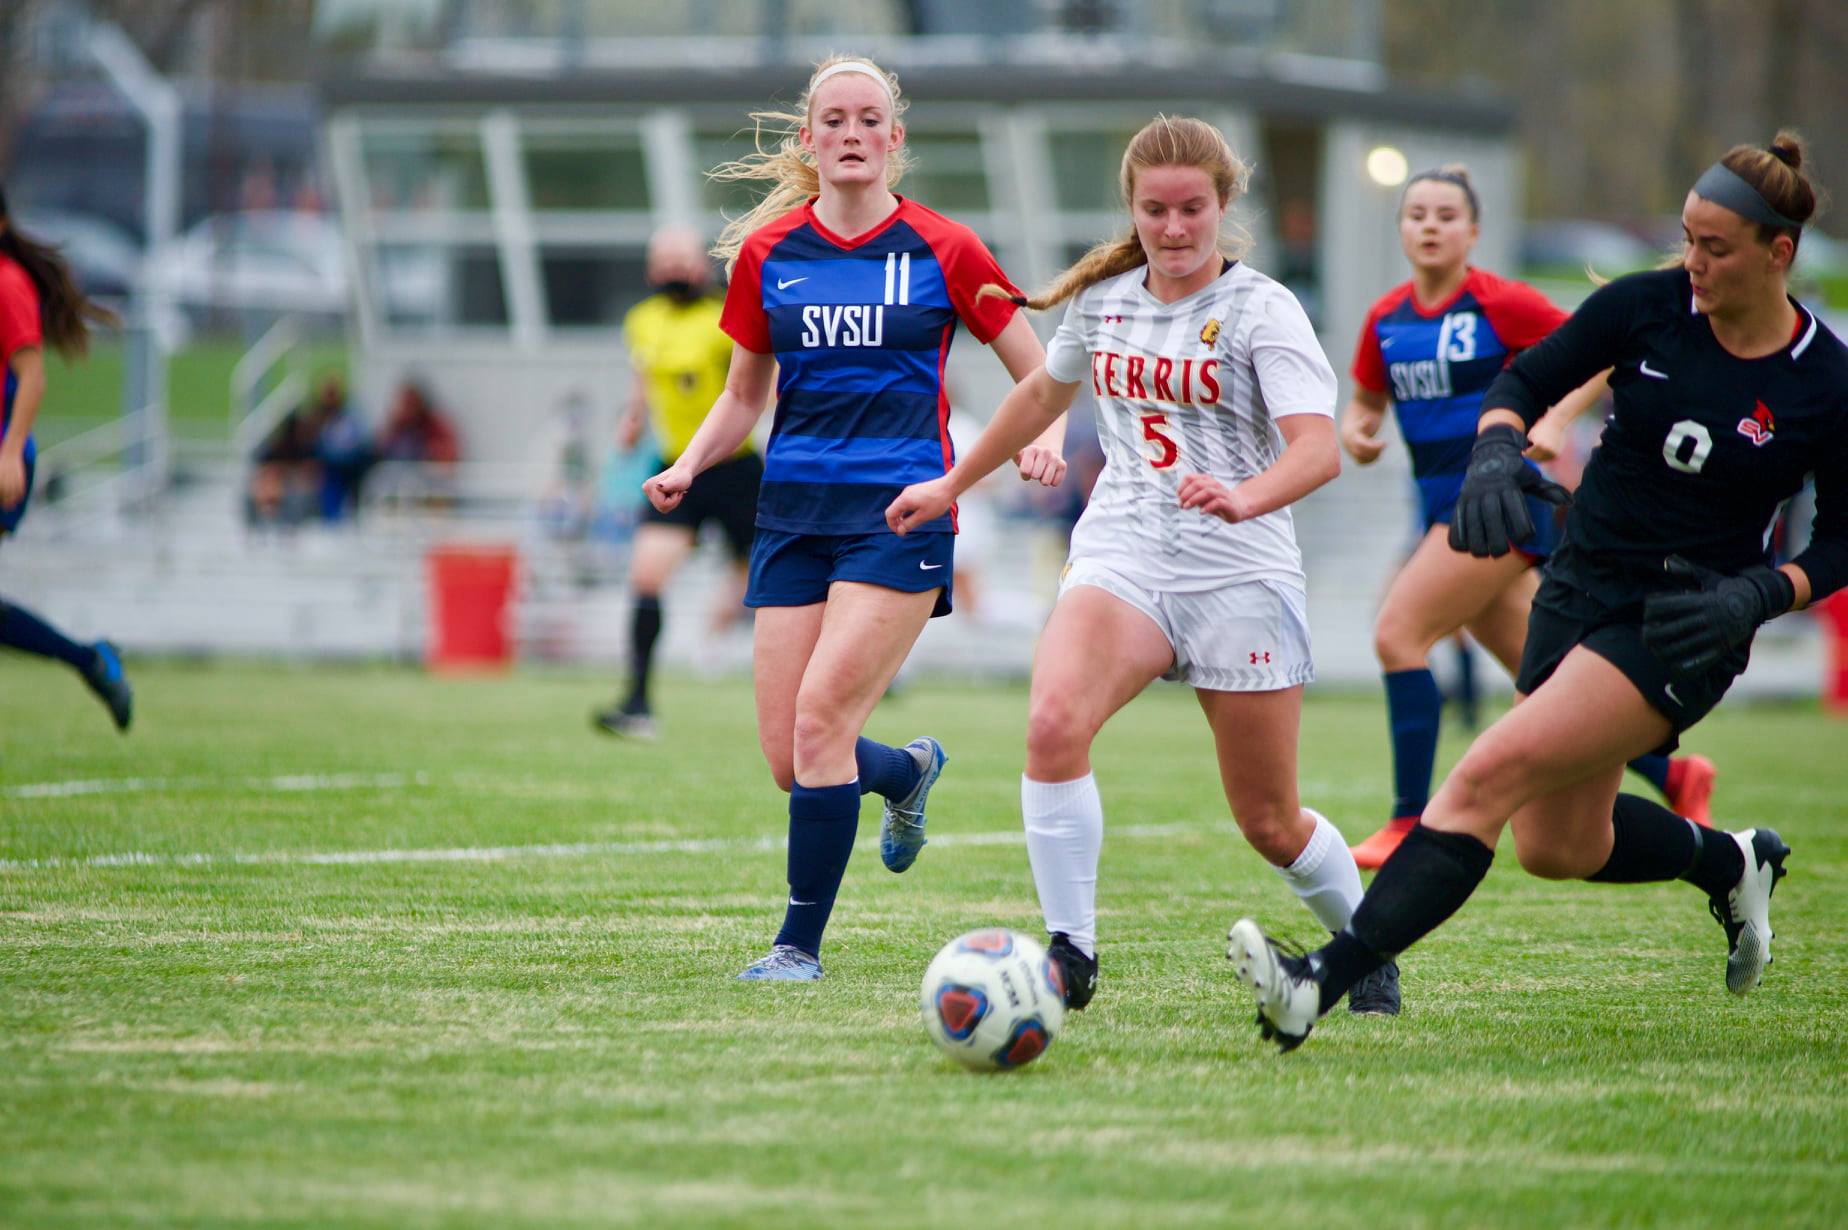 Bulldogs Cruise Past Cardinals To Earn Right To Host GLIAC Semifinals